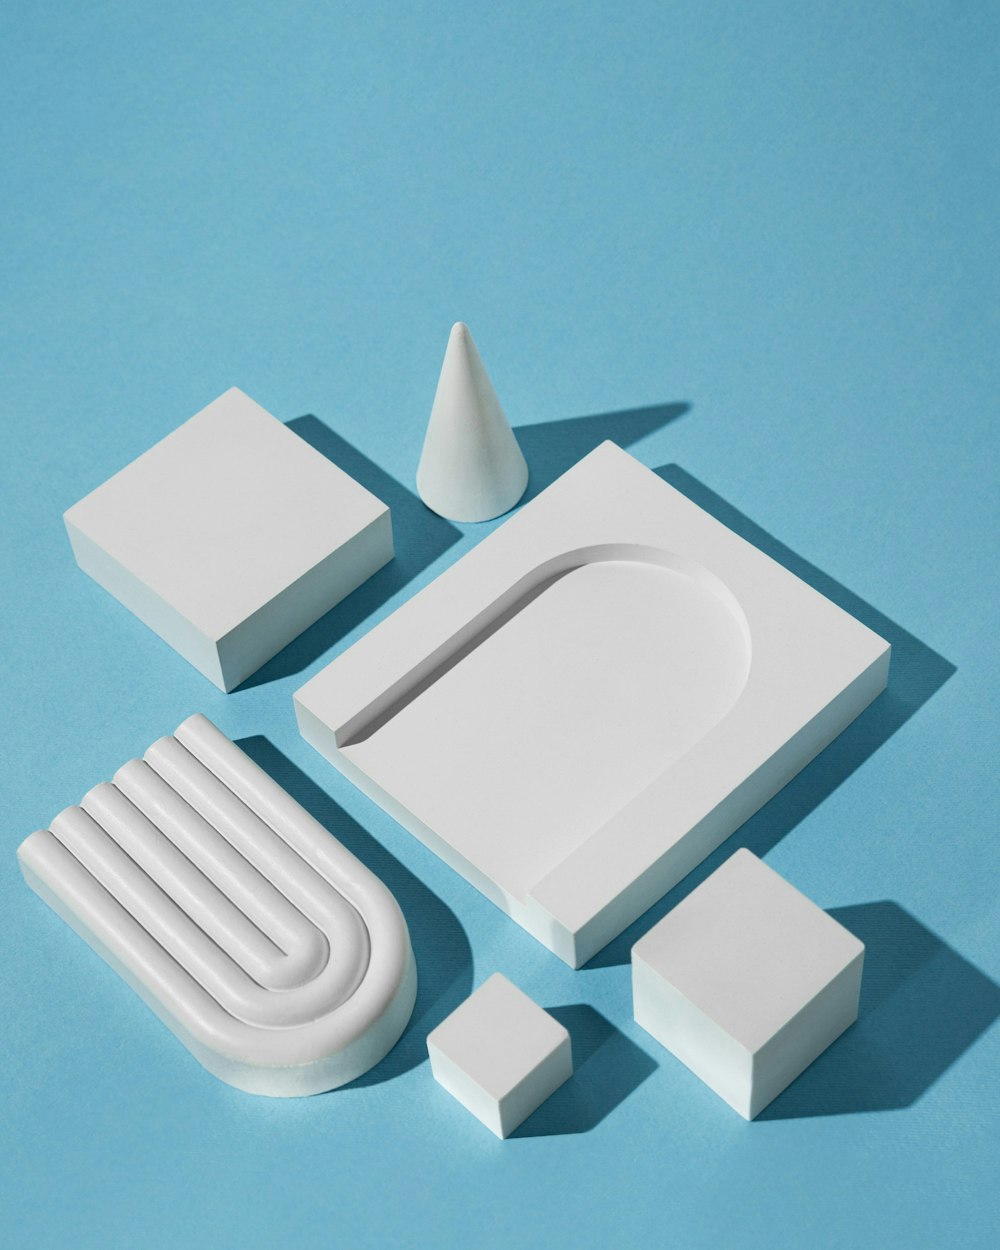 a set of white objects on a blue surface